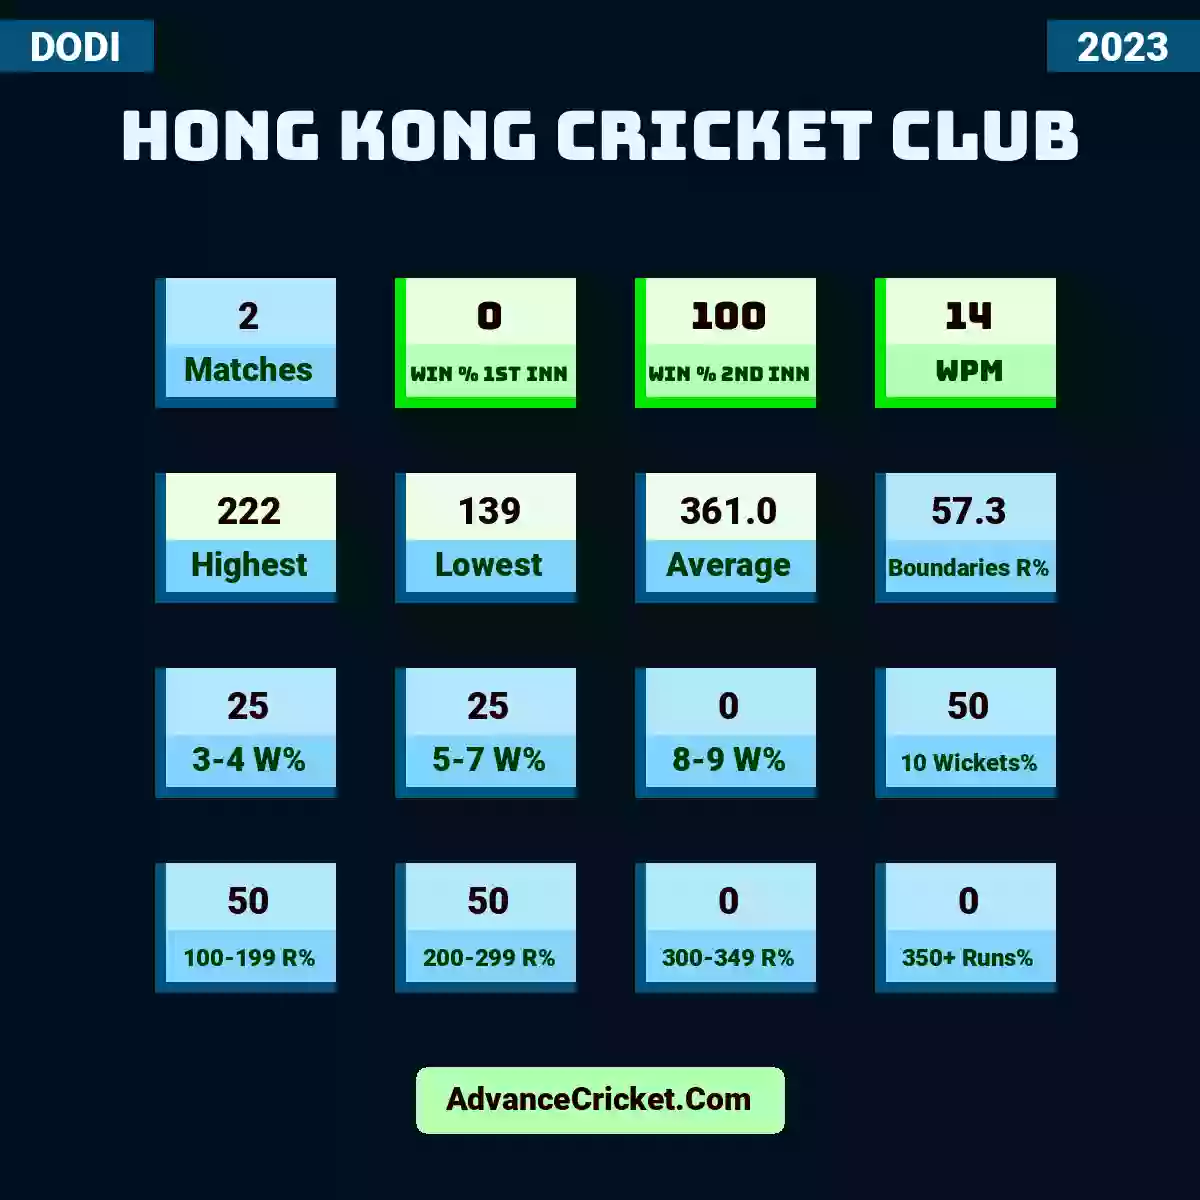 Image showing Hong Kong Cricket Club with Matches: 2, Win % 1st Inn: 0, Win % 2nd Inn: 100, WPM: 14, Highest: 222, Lowest: 139, Average: 361.0, Boundaries R%: 57.3, 3-4 W%: 25, 5-7 W%: 25, 8-9 W%: 0, 10 Wickets%: 50, 100-199 R%: 50, 200-299 R%: 50, 300-349 R%: 0, 350+ Runs%: 0.